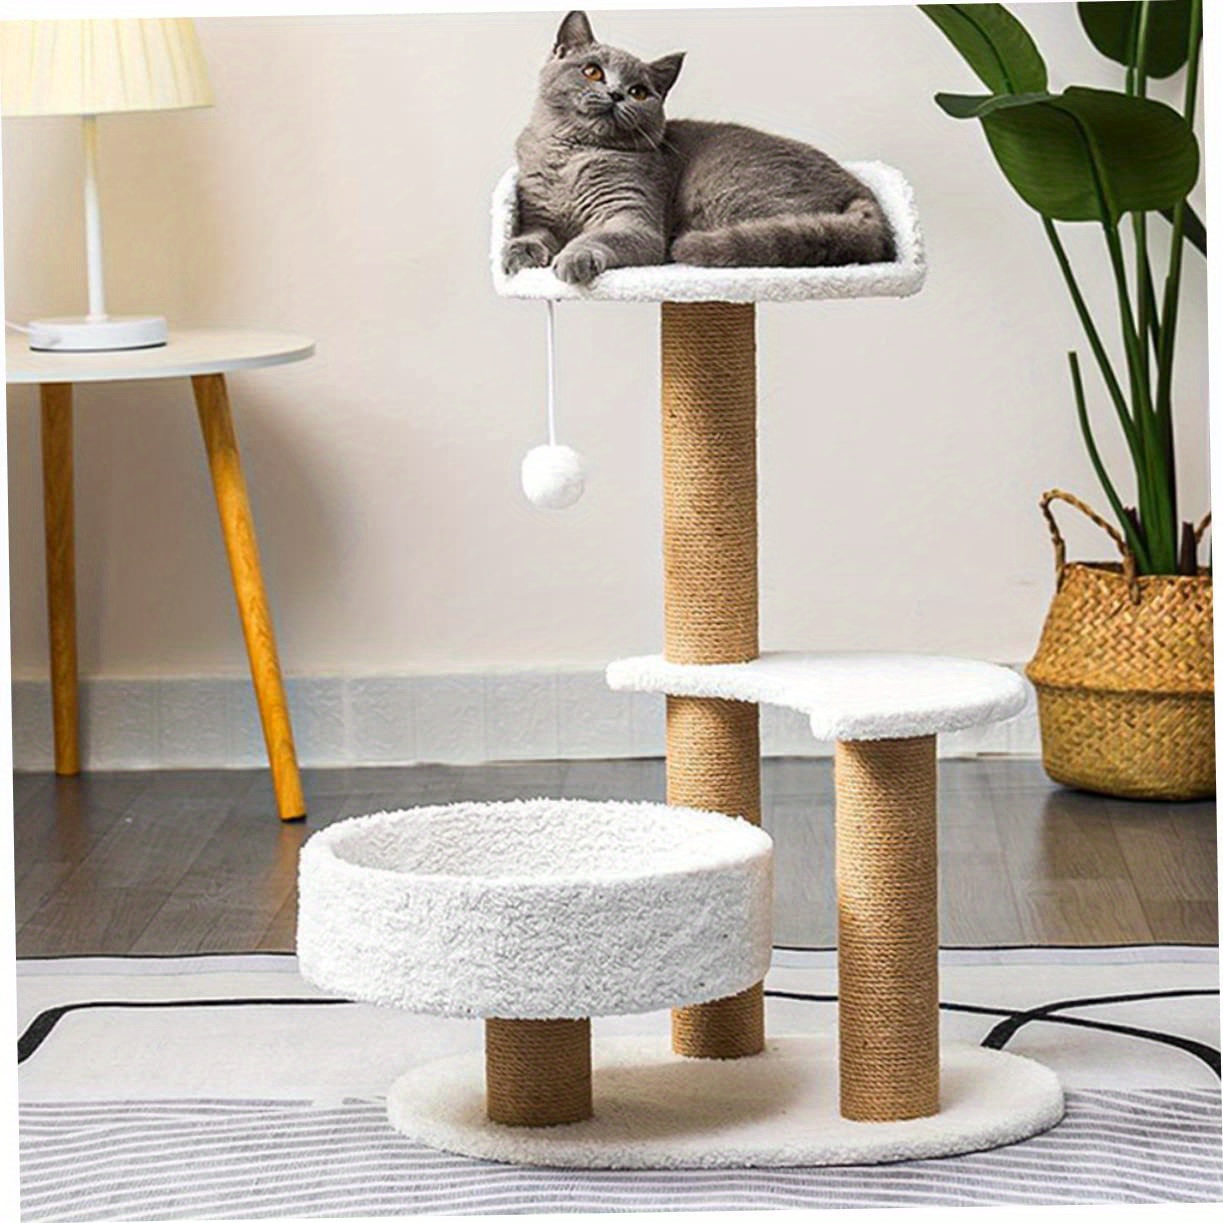 

Premium Sisal Rope Cat Scratching Posts - Multi-level Cat Tree With Plush Beds And Play Balls For Interactive Play - Durable Replacement Columns For Cat Scratching Towers - Ideal For Indoor Cats